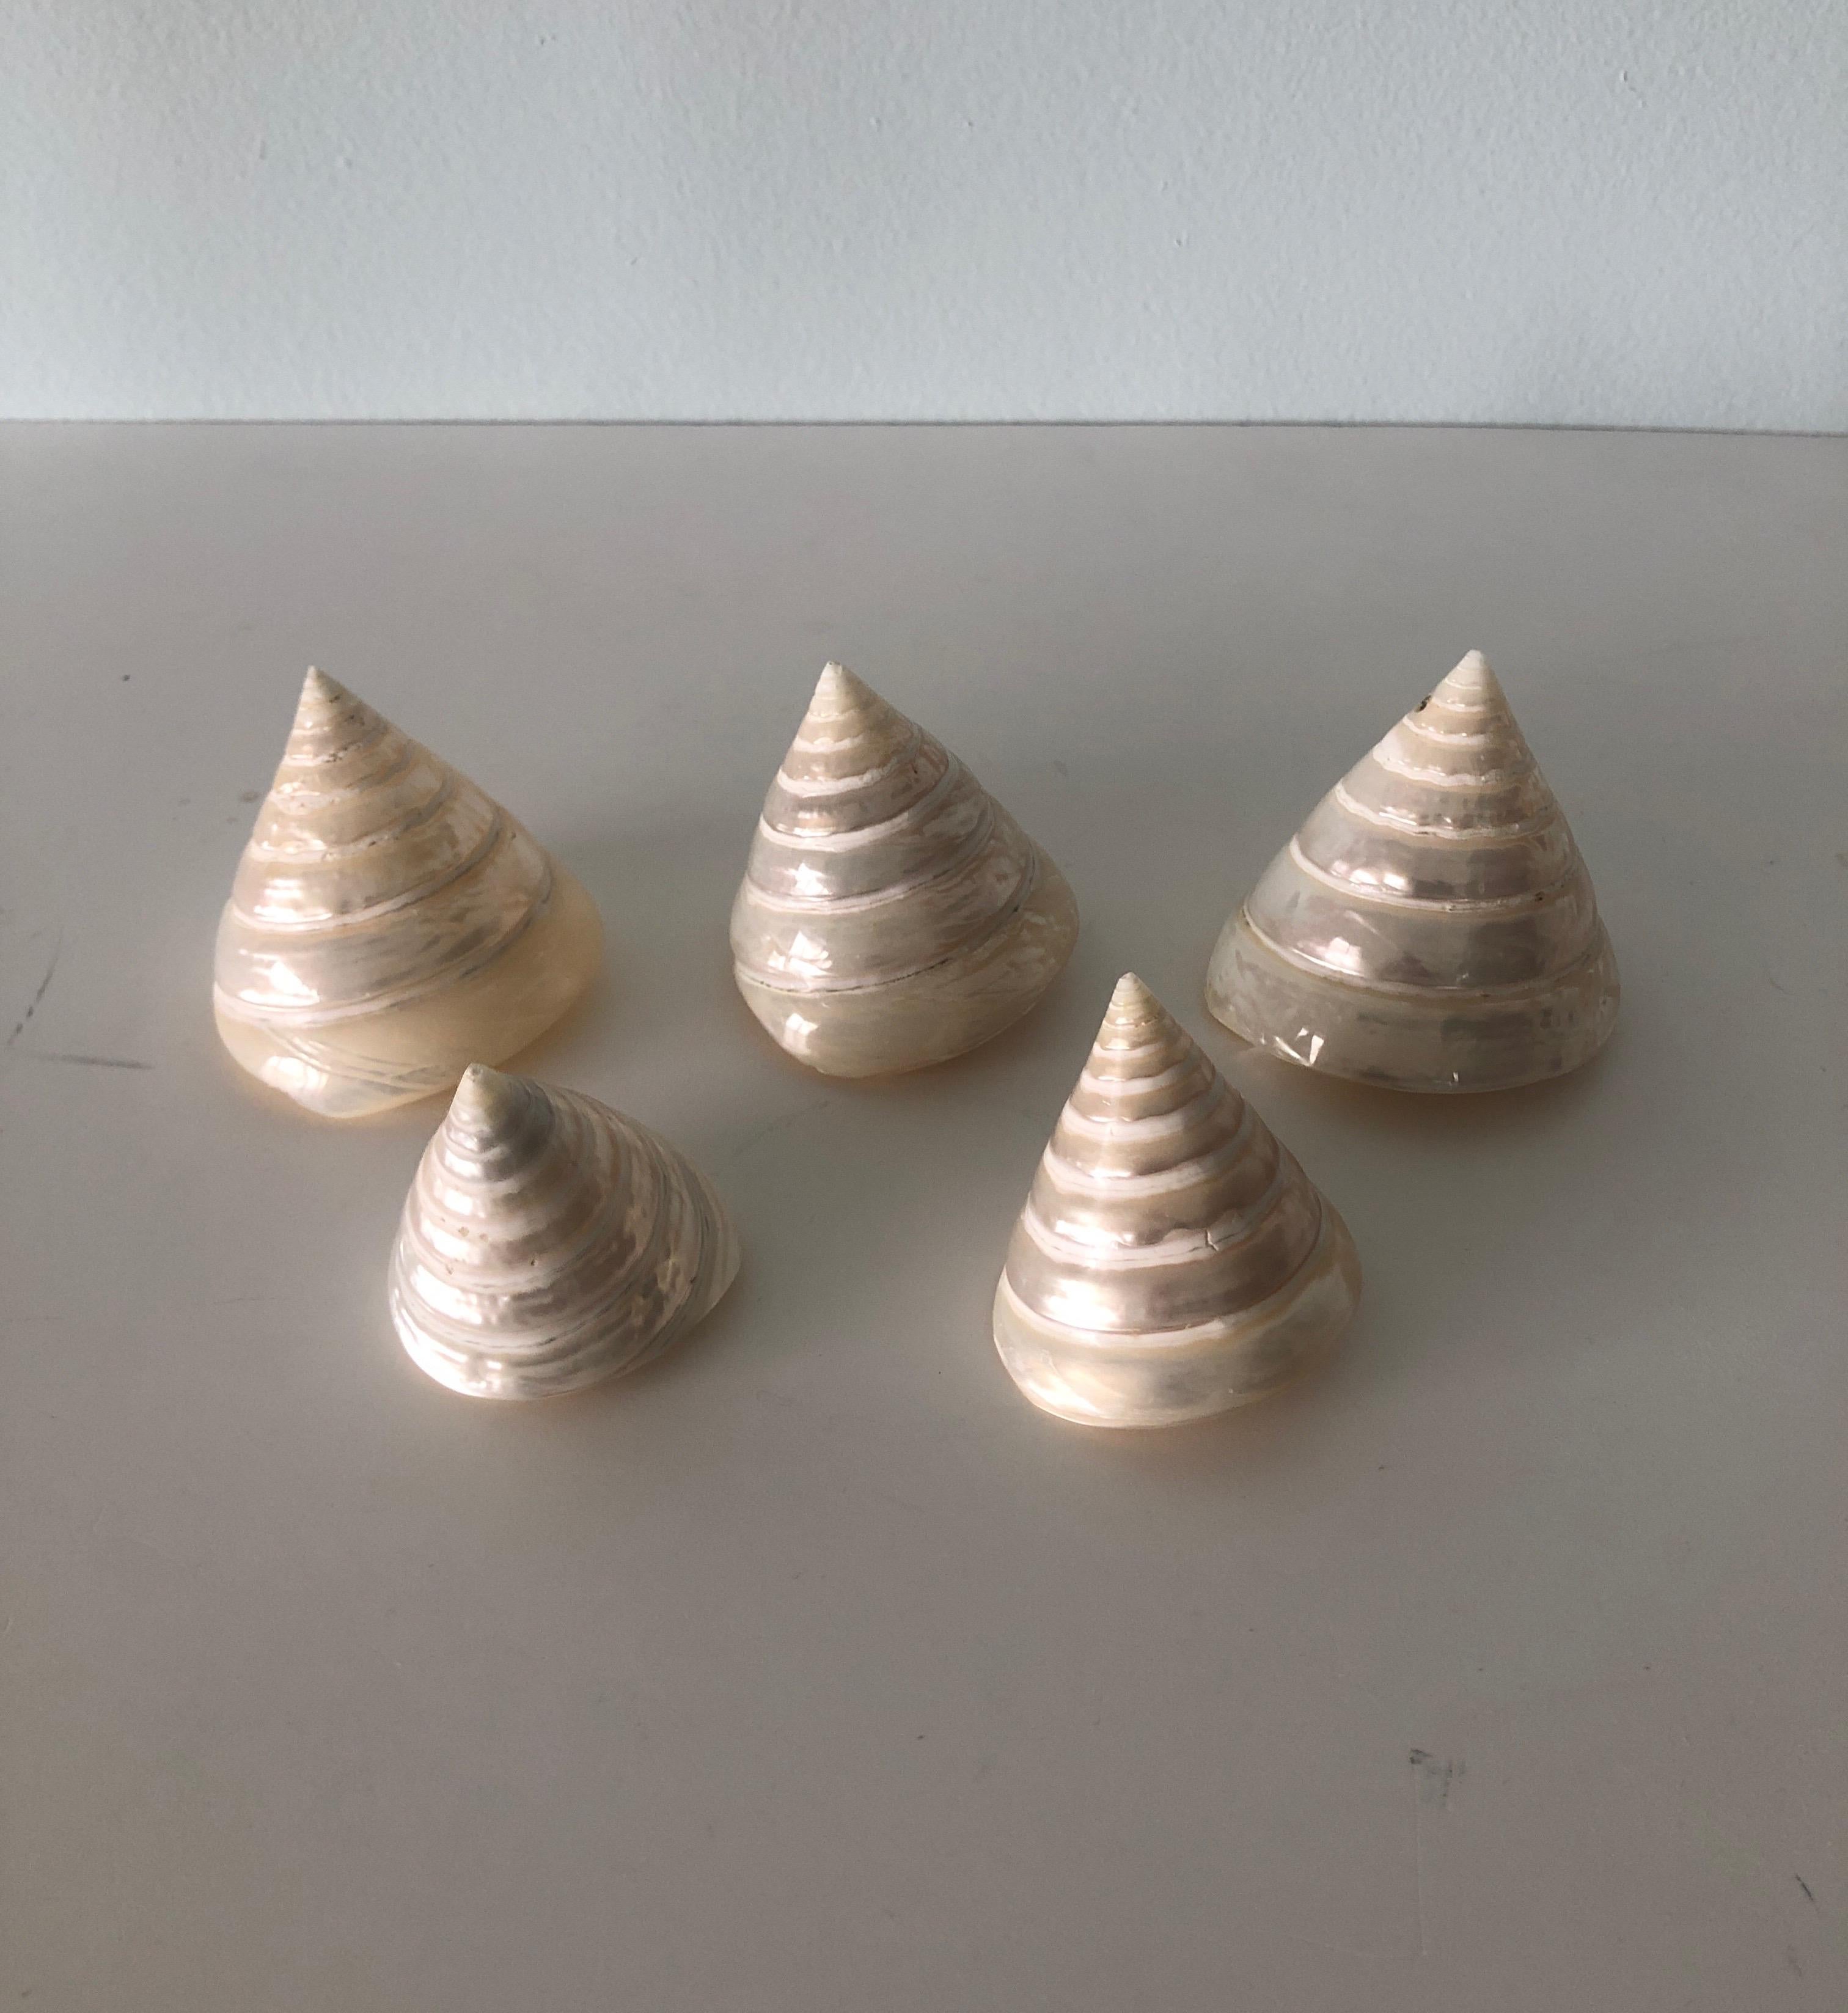 Set of (6) Pearly Cone Shape Spiral Seashells.
Sizes:
Large:2.%